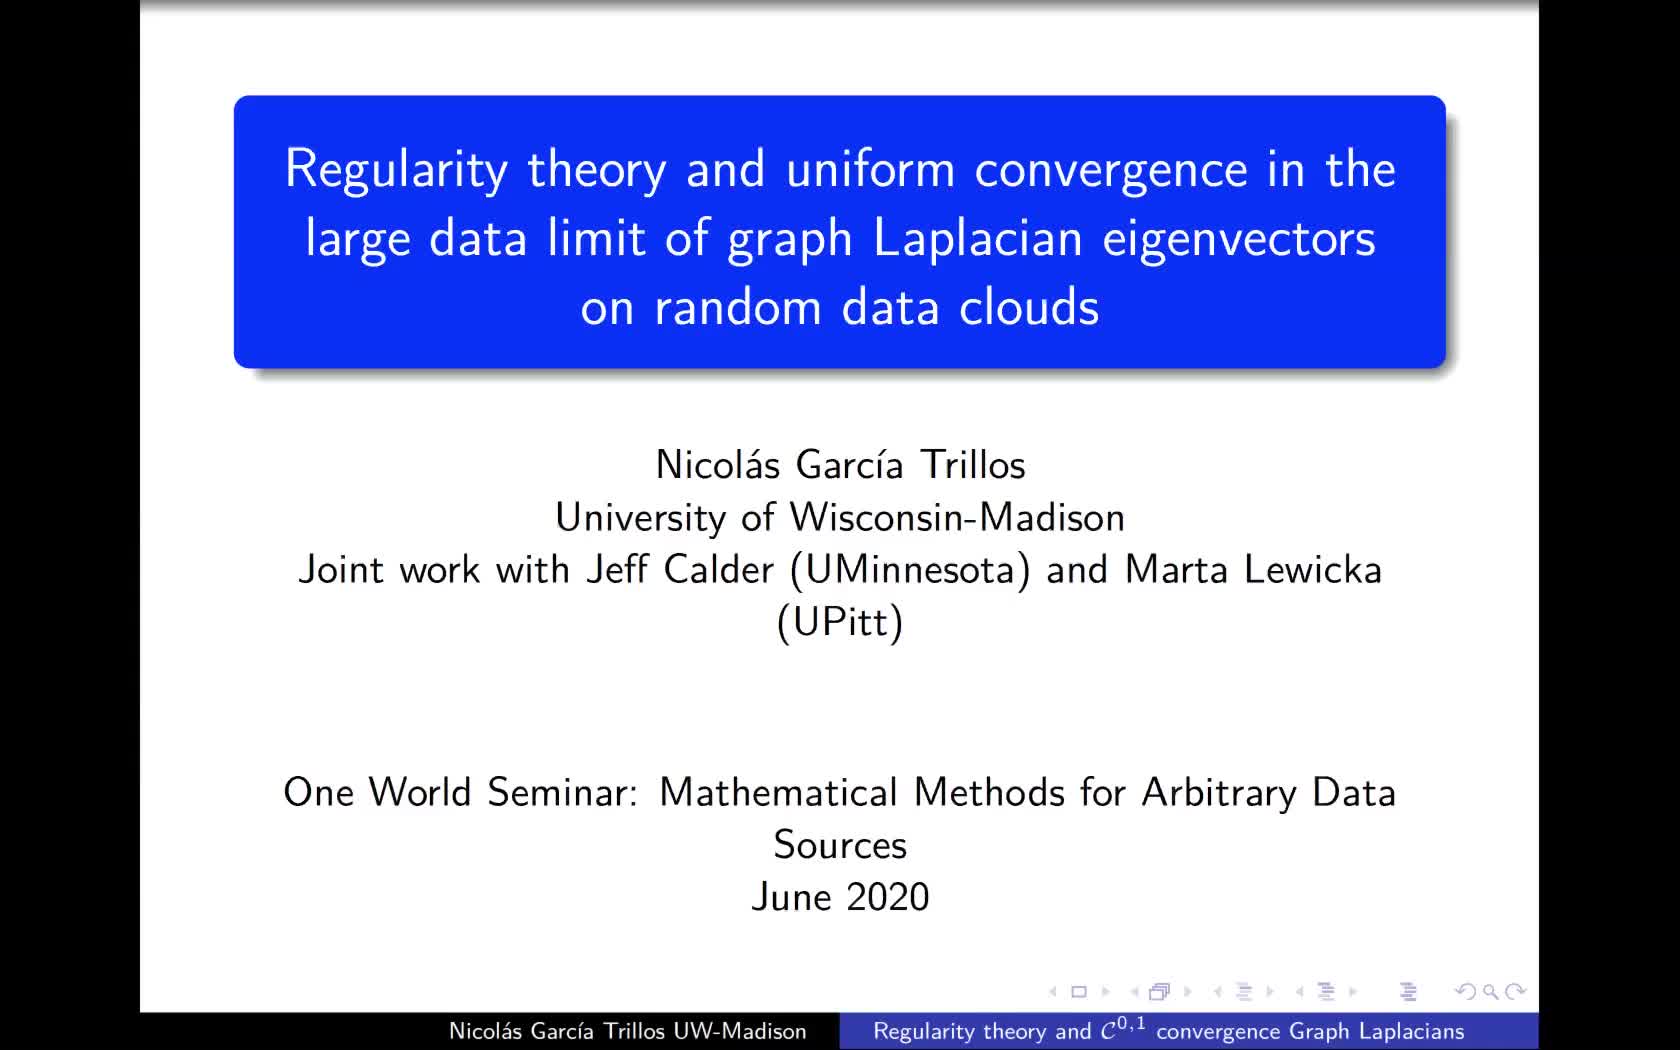 Nicolás García Trillos: Regularity theory and uniform convergence in the large data limit of graph Laplacian eigenvectors on random data clouds preview image